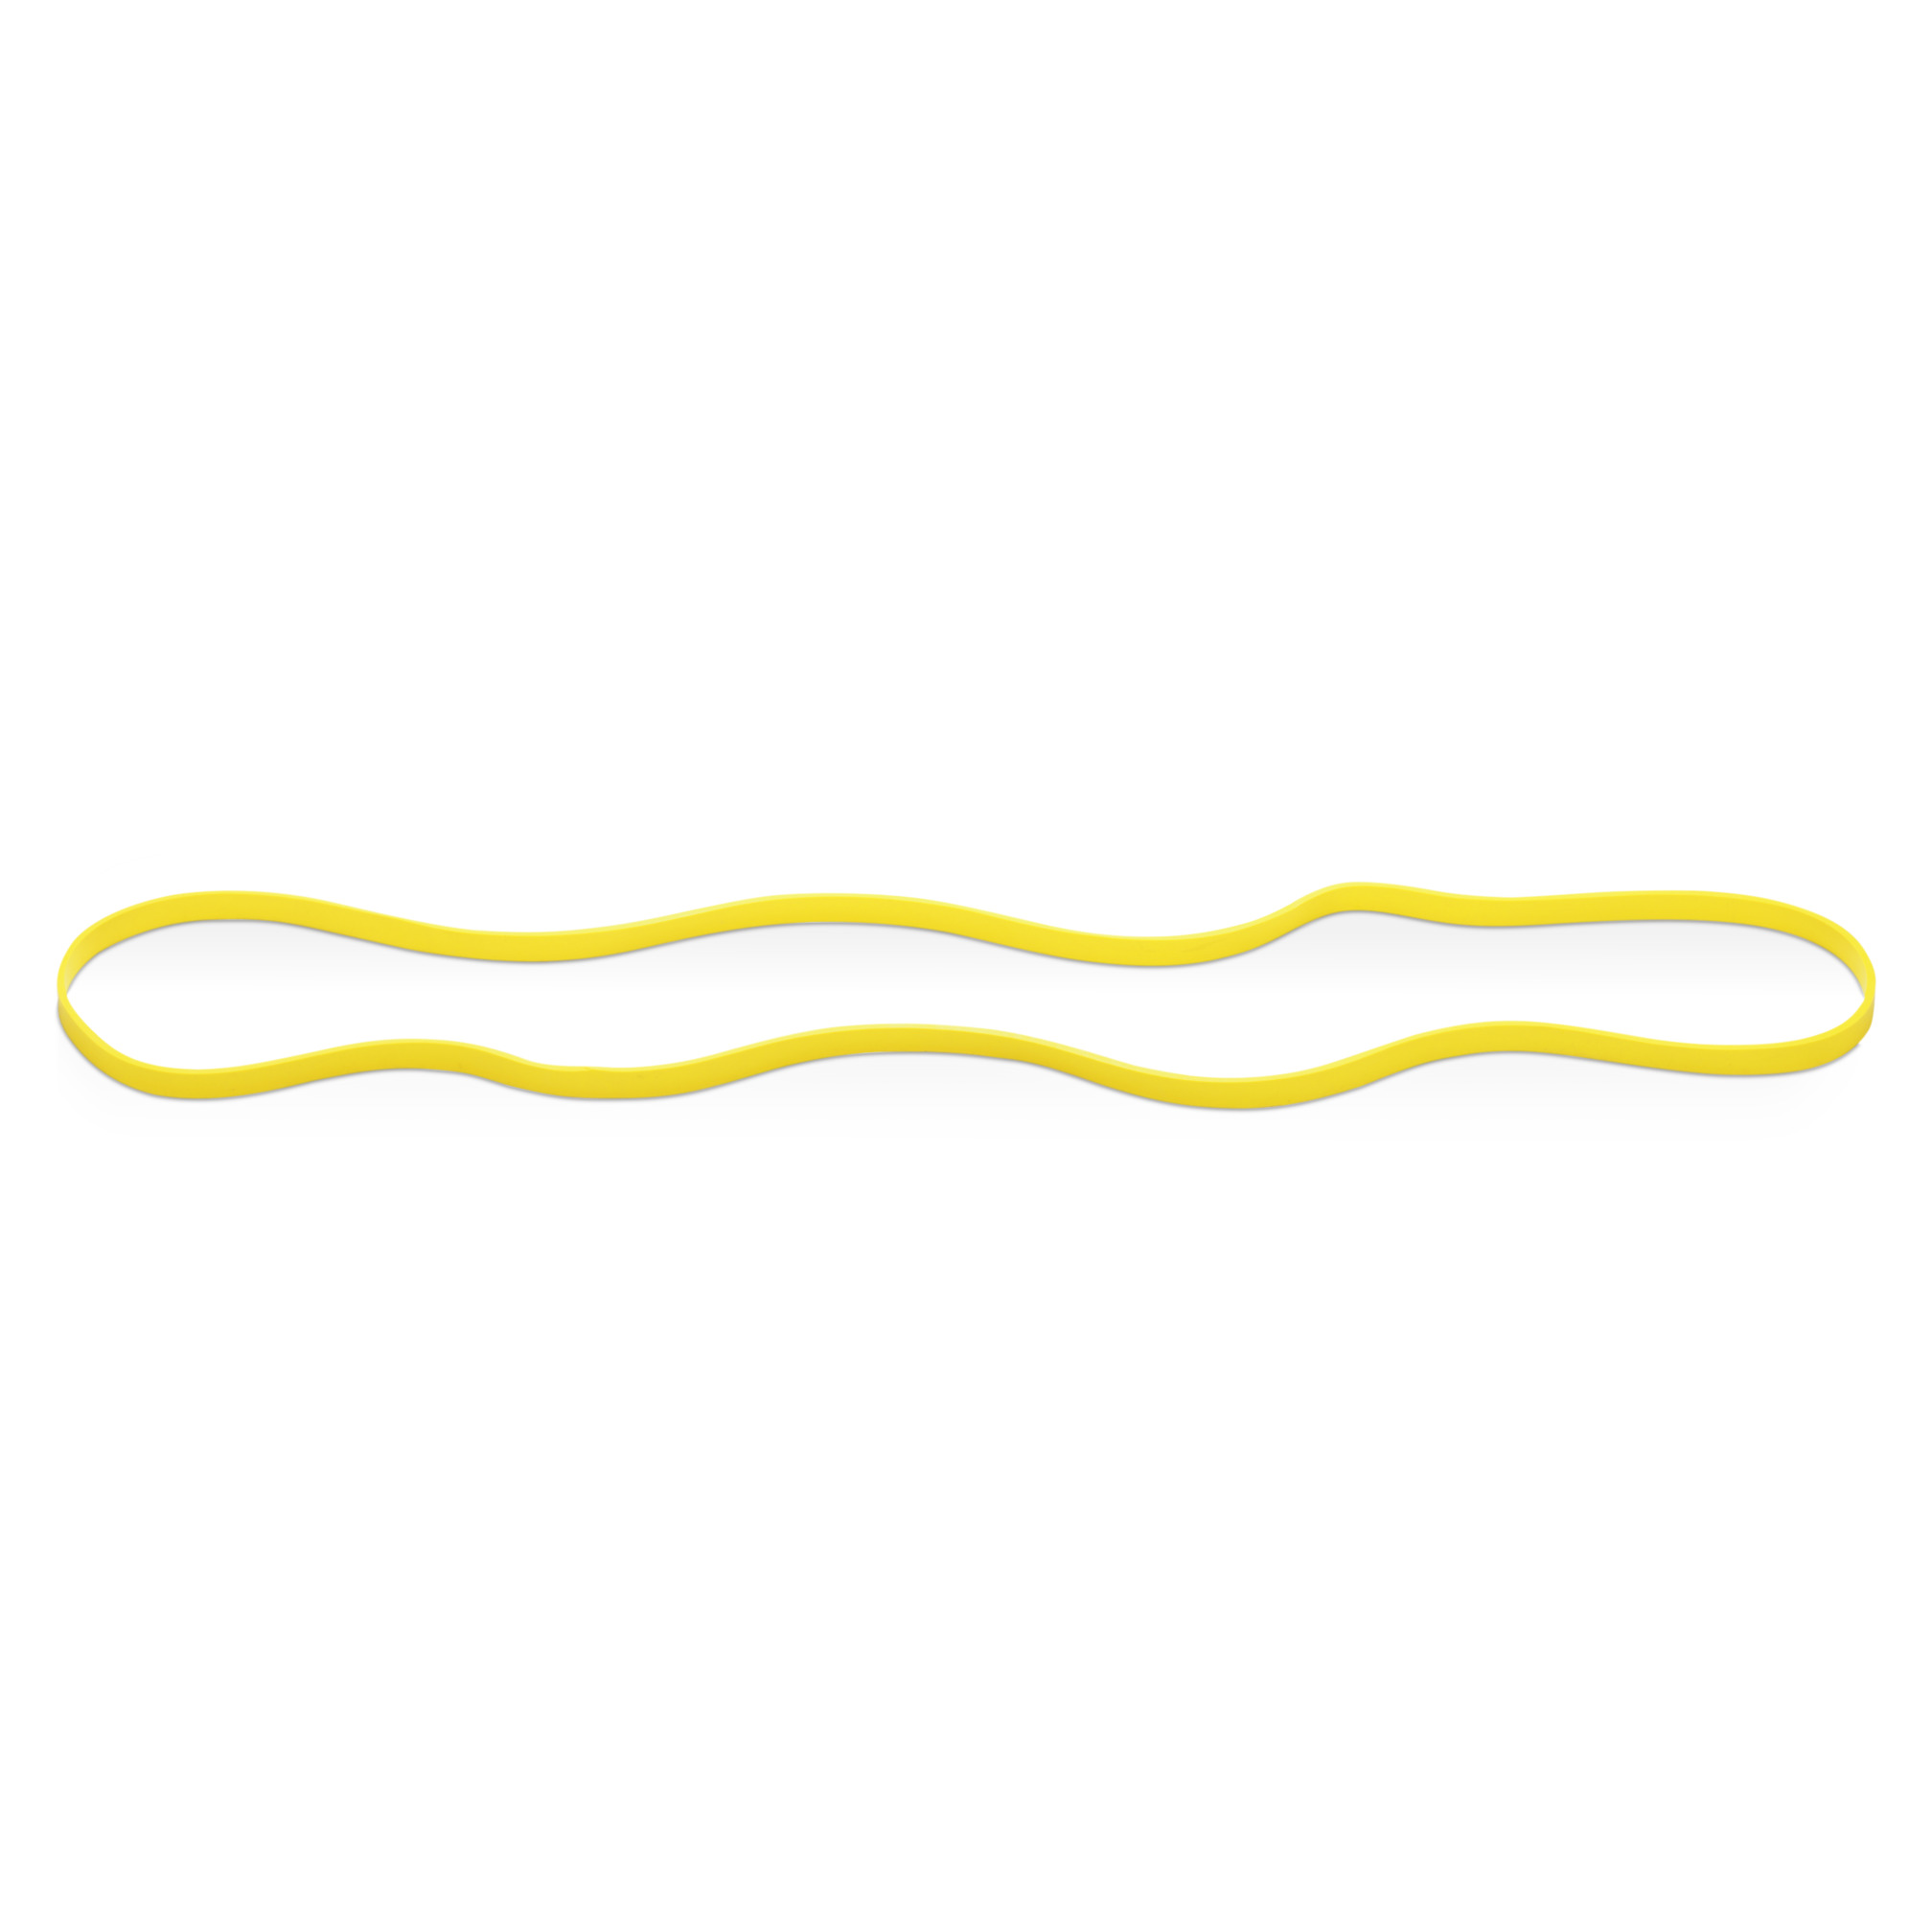 Rubber Band resistance band, light